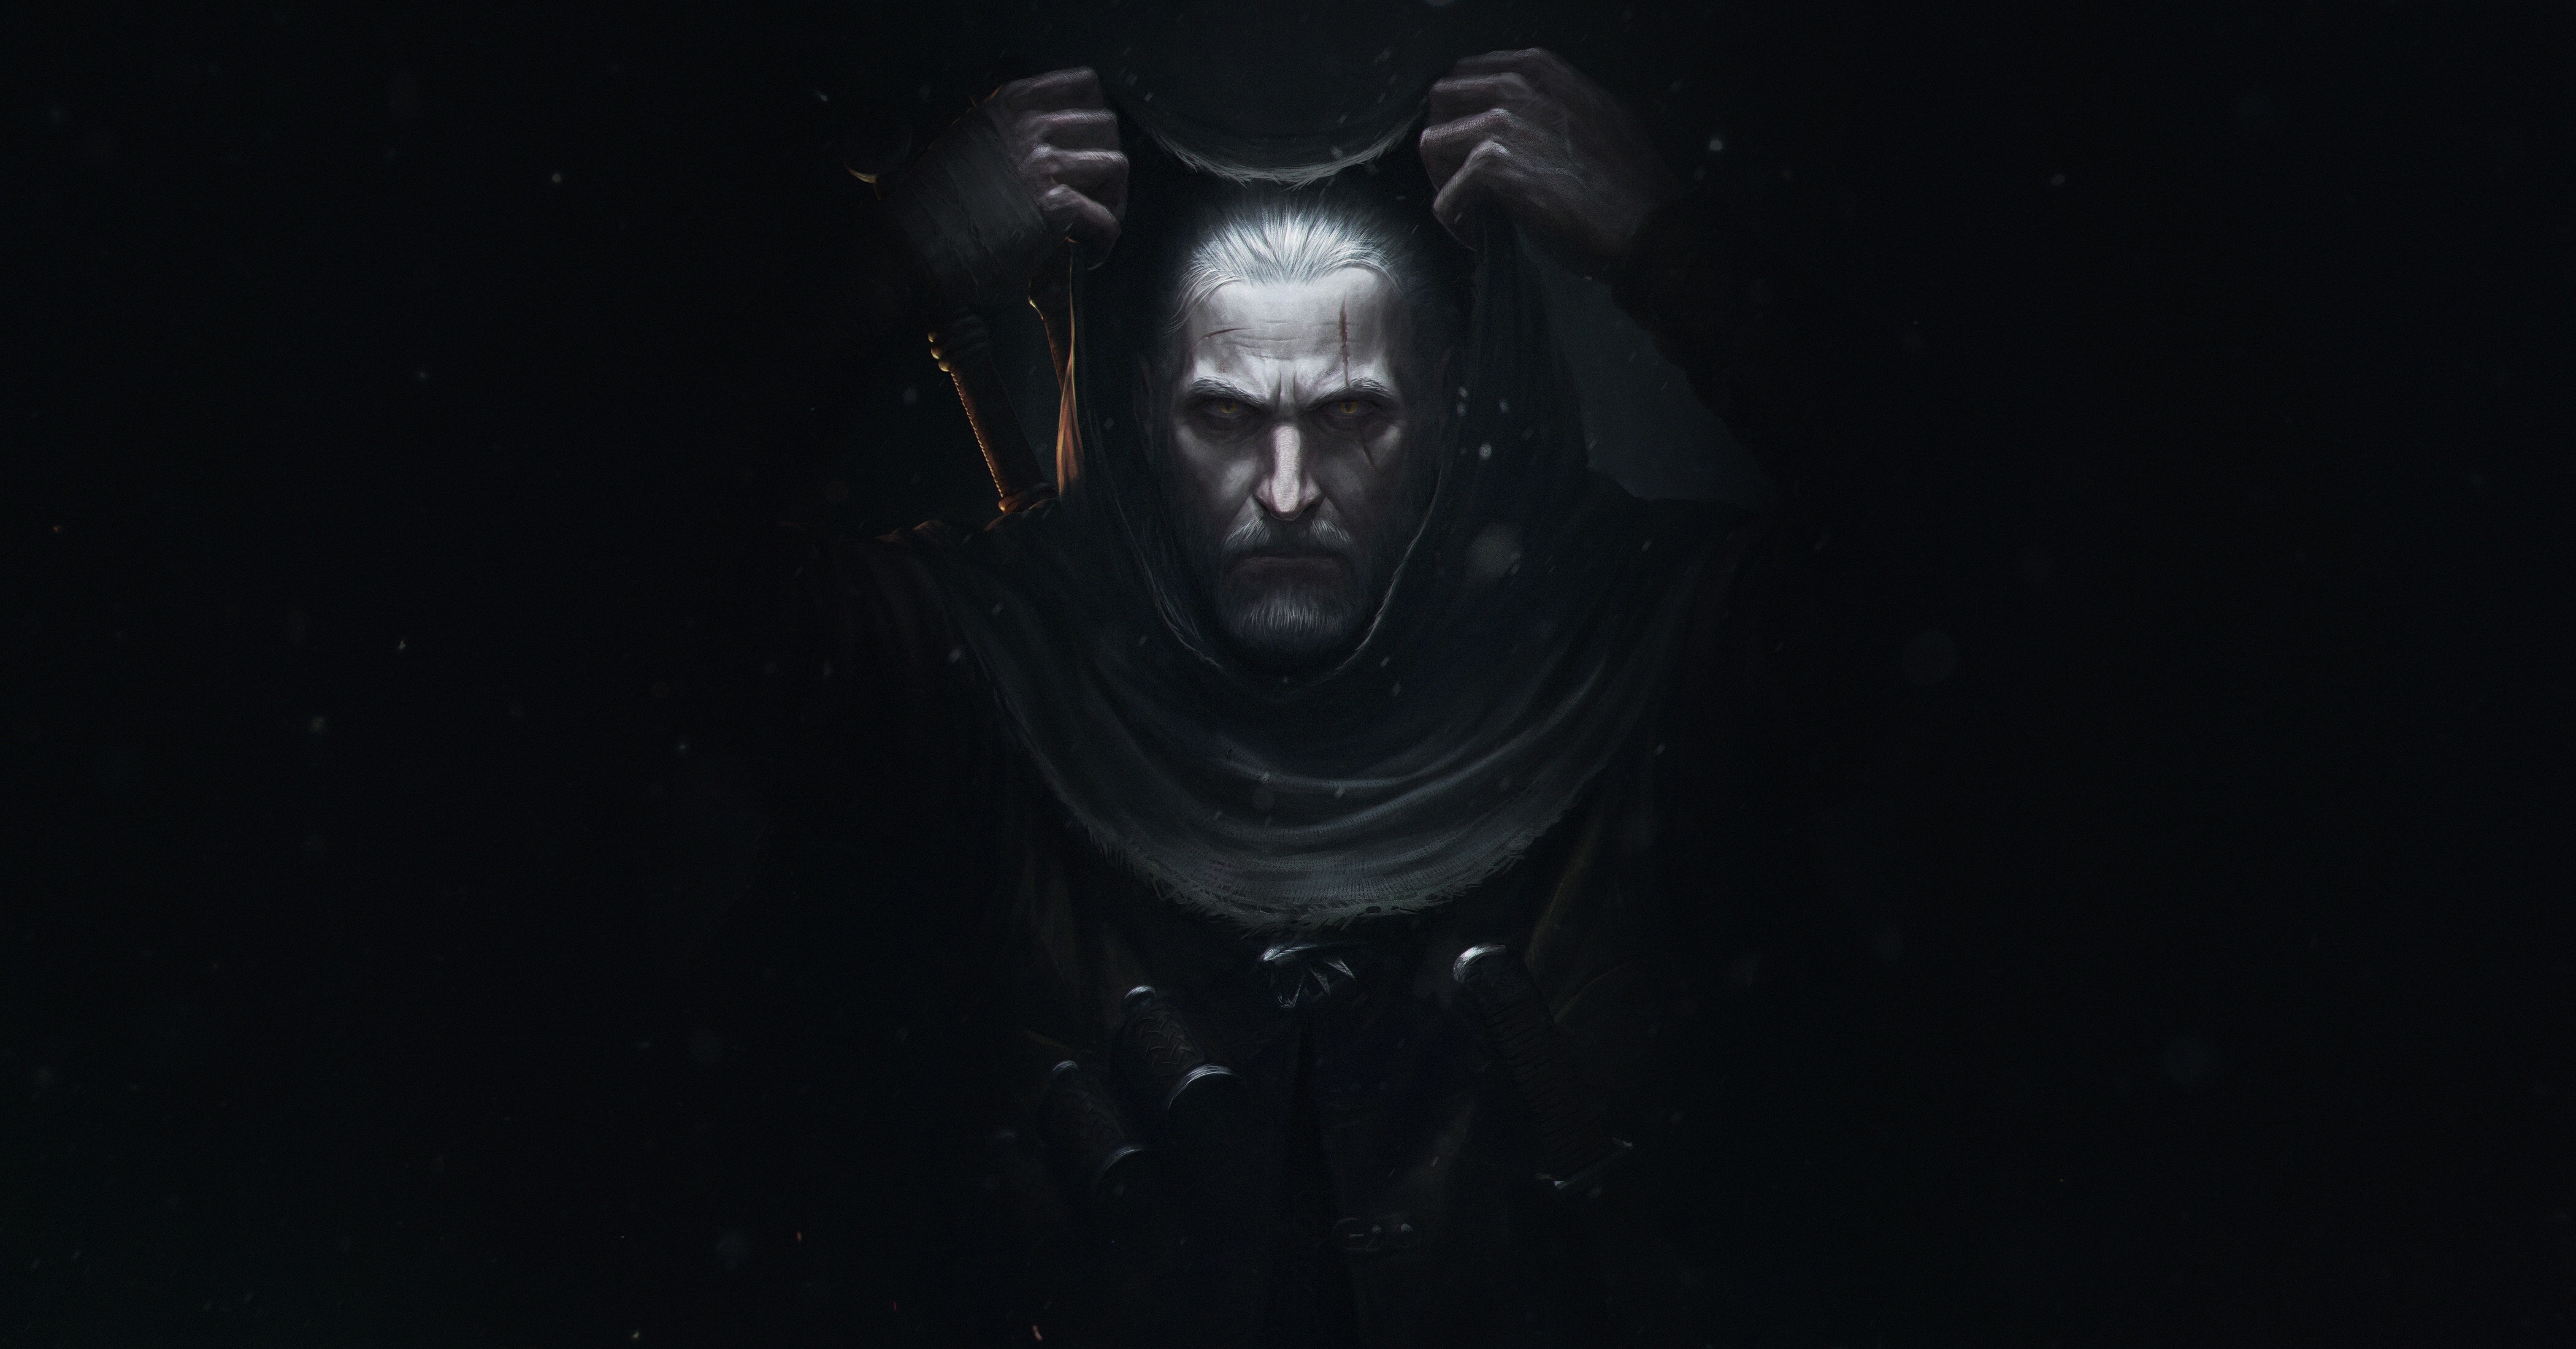 the witcher 3 wallpaper hd